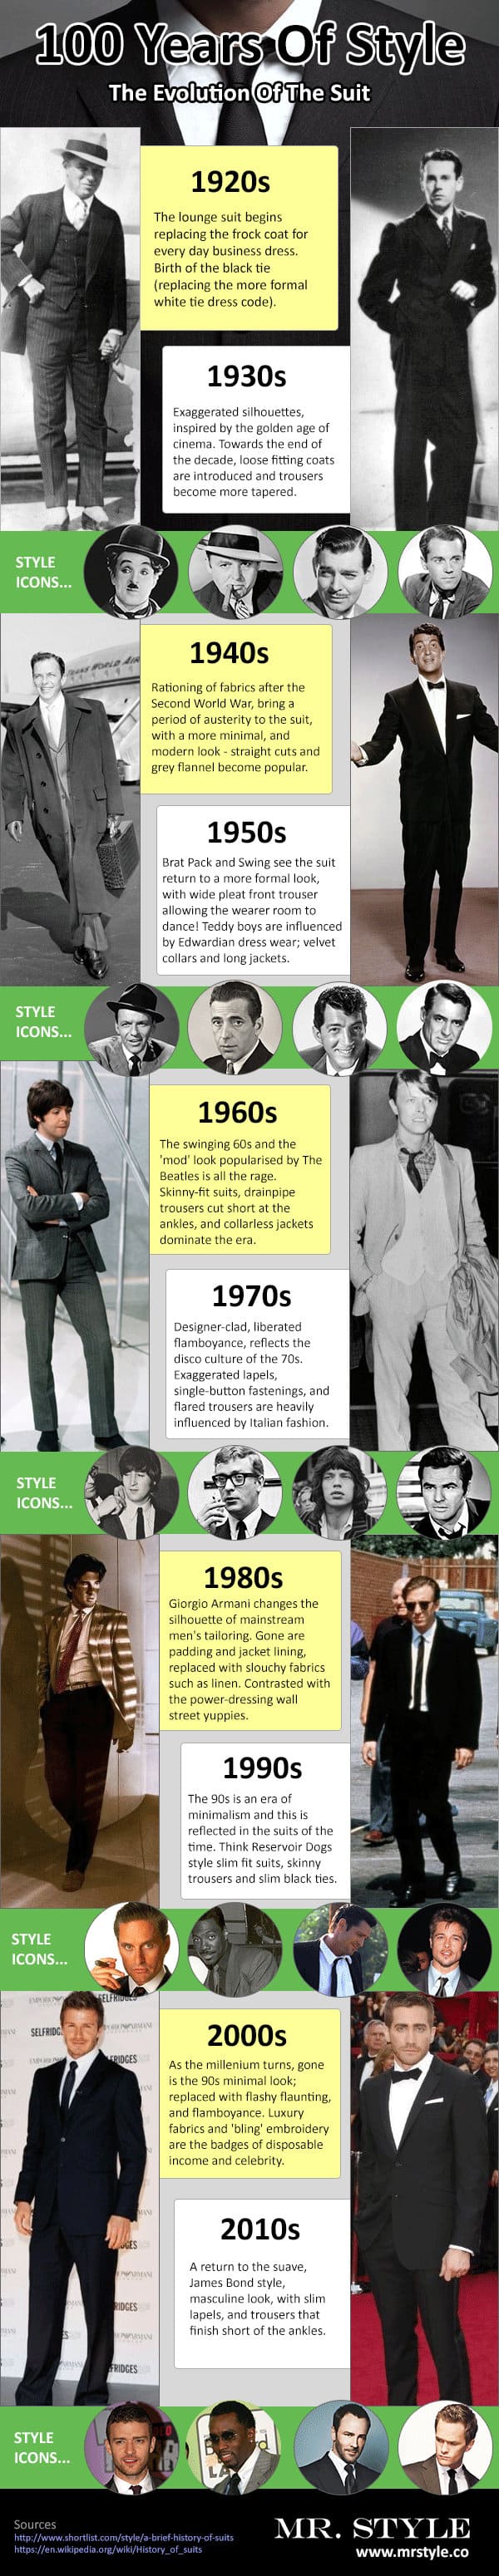 Evolution Of The Suit Infographic